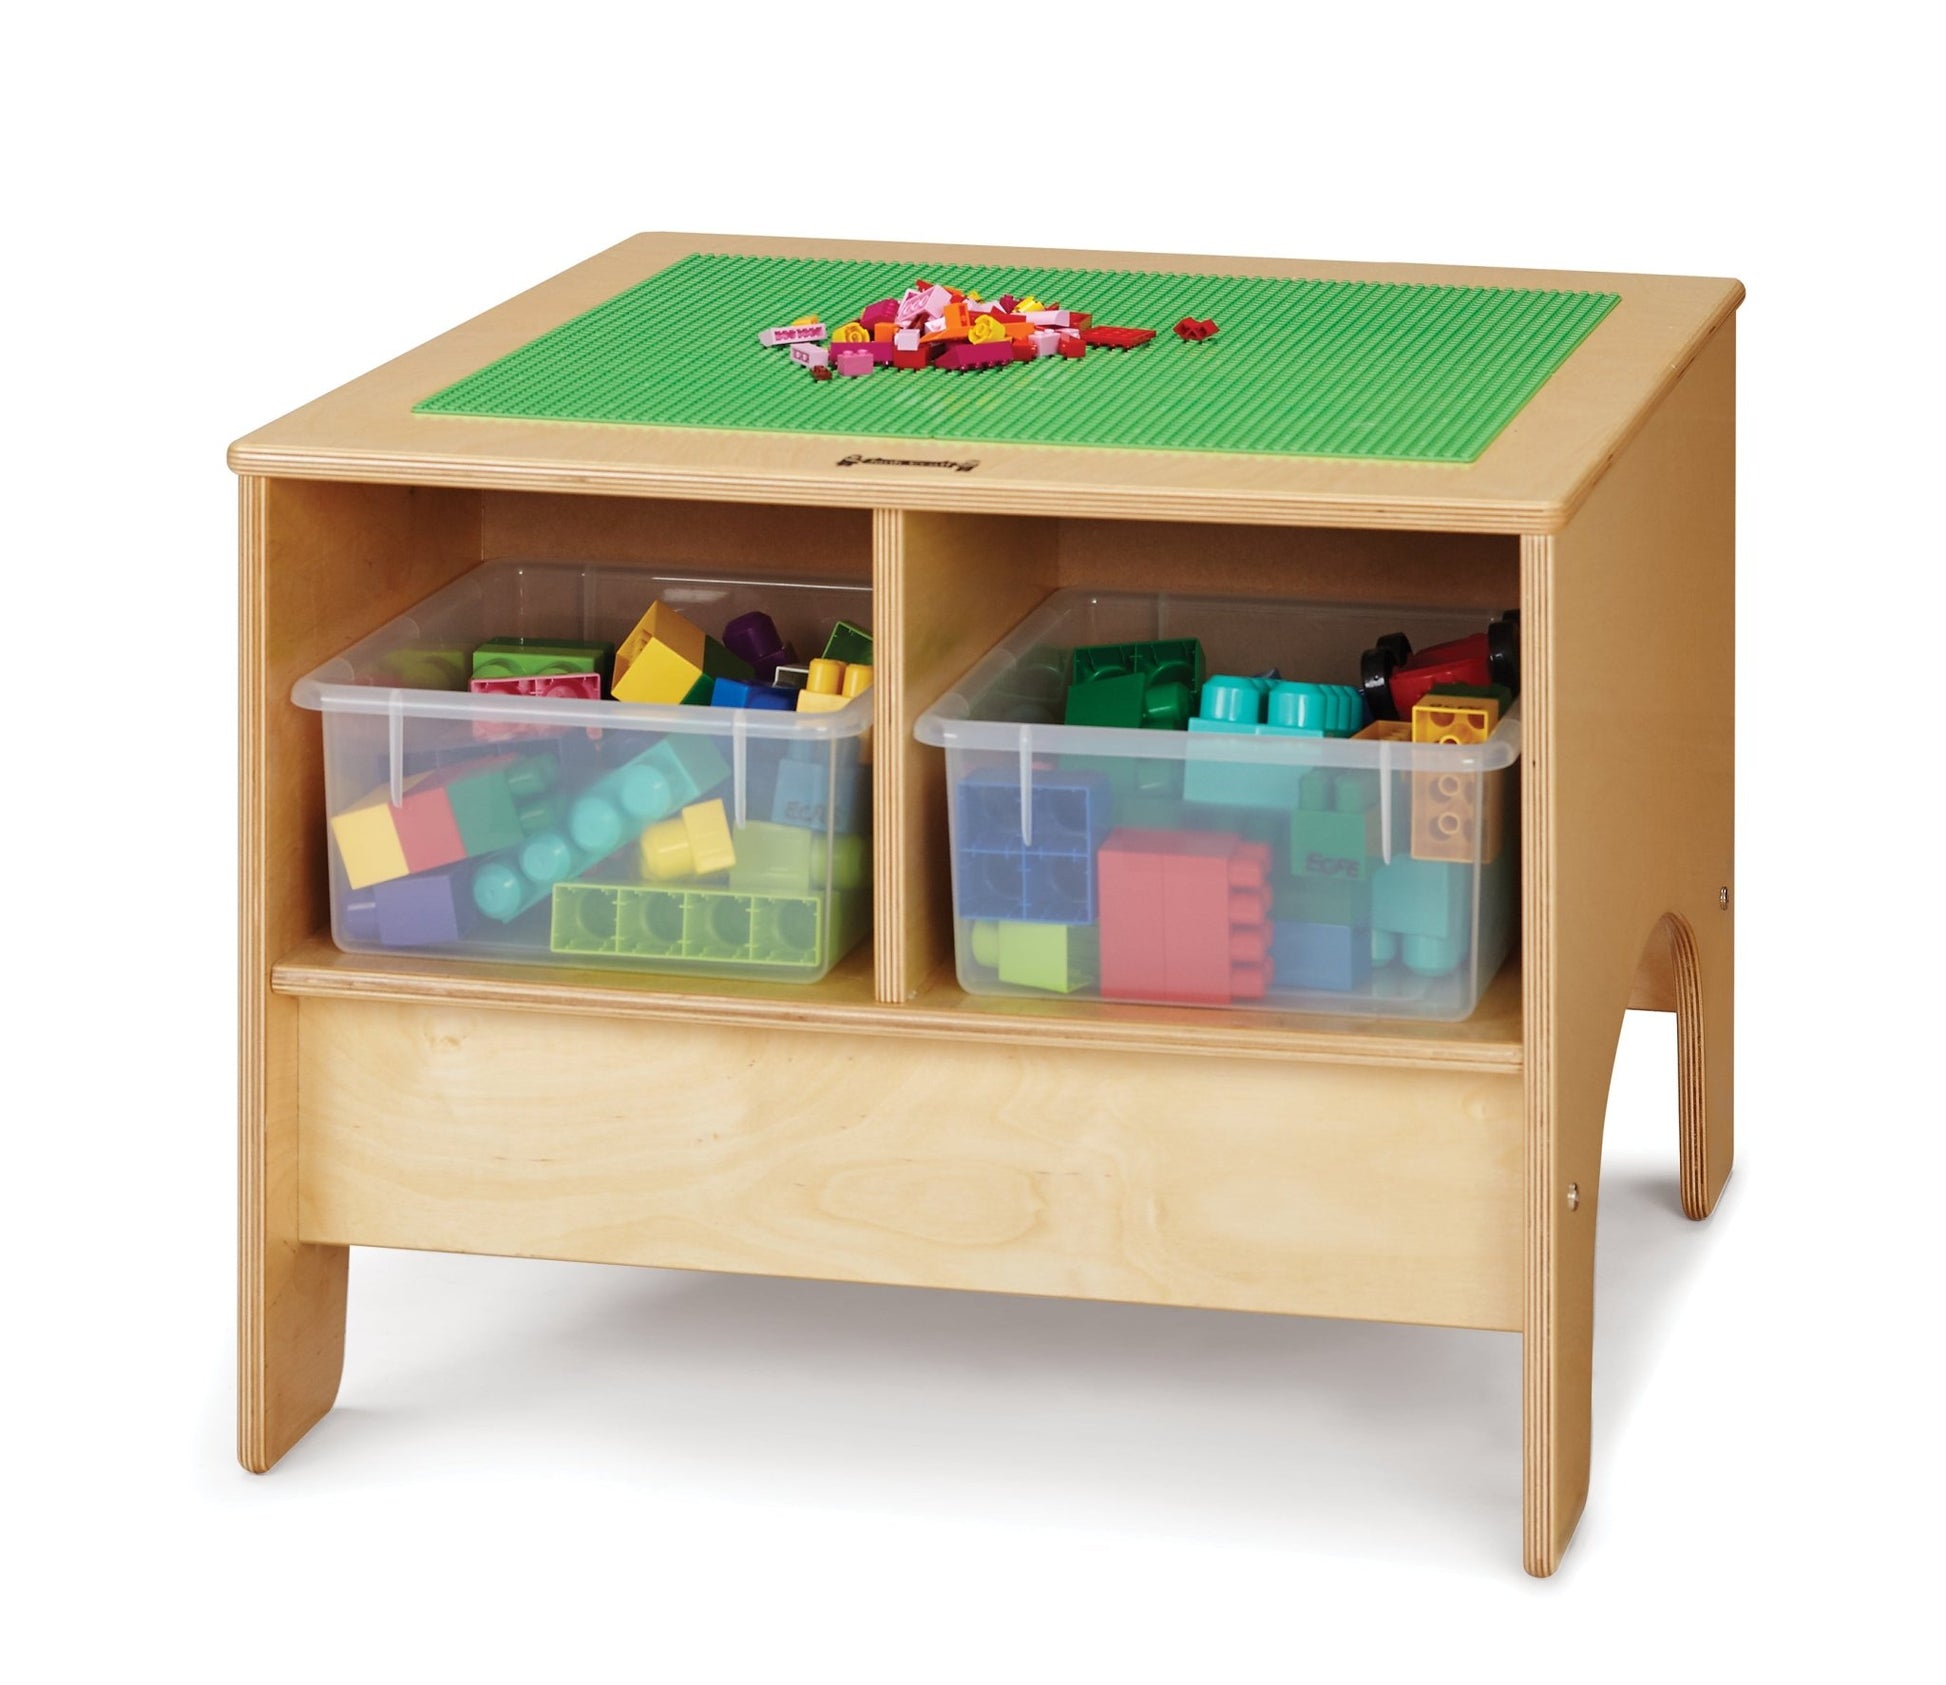 Jonti-Craft Building Table With Lego Compatible Top- Clear Storage Tubs (Jonti-Craft JON-57440JC) - SchoolOutlet